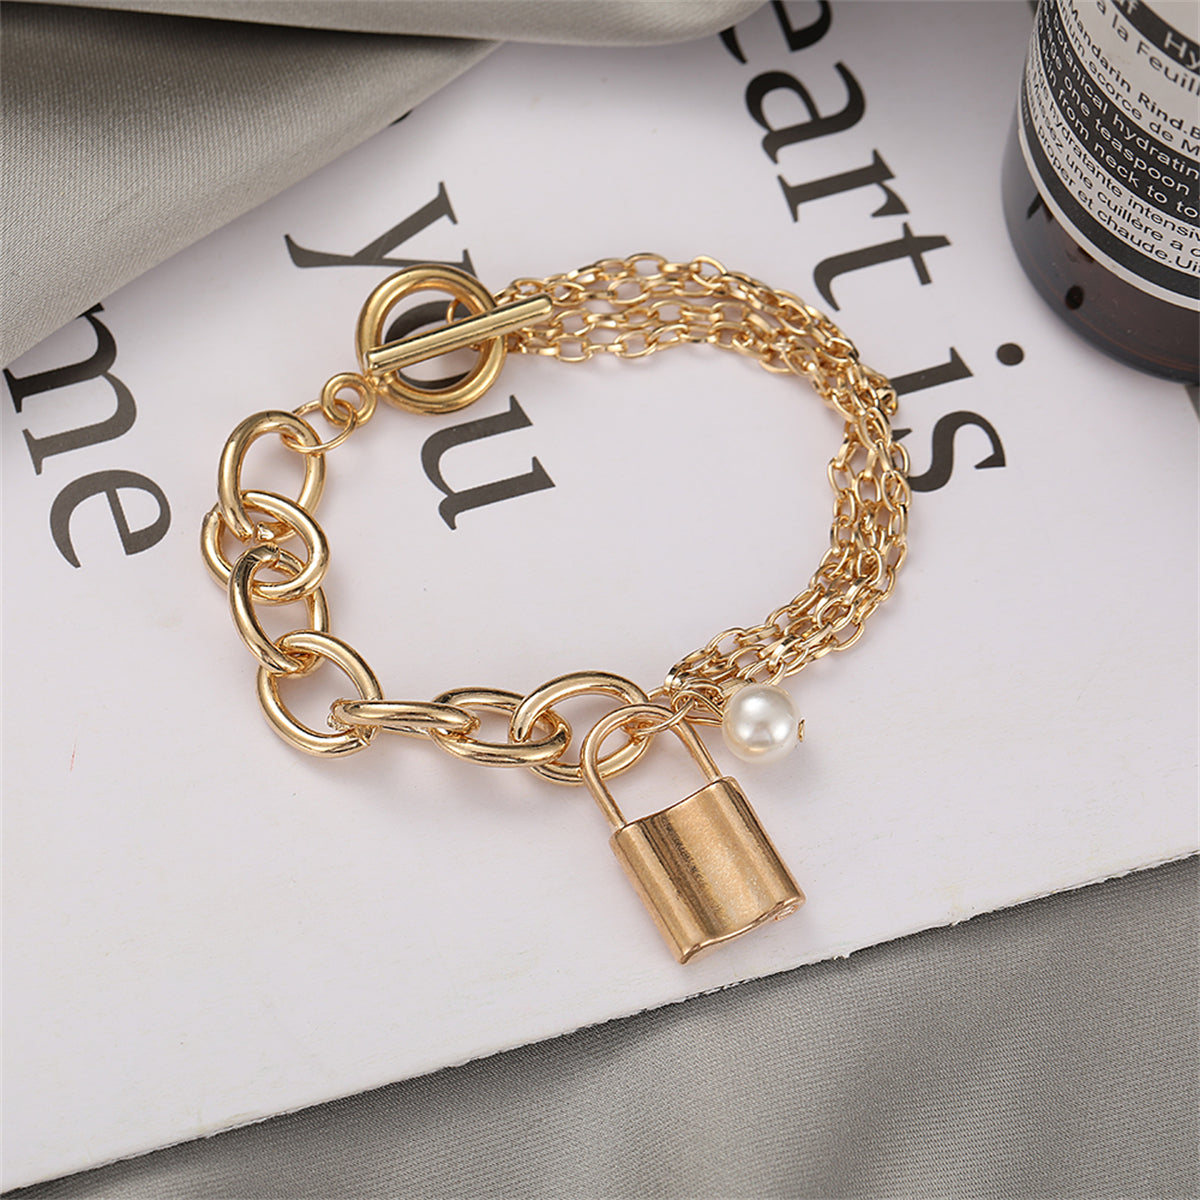 Pearl & 18K Gold-Plated Layered Chain Lock Charm Anklet